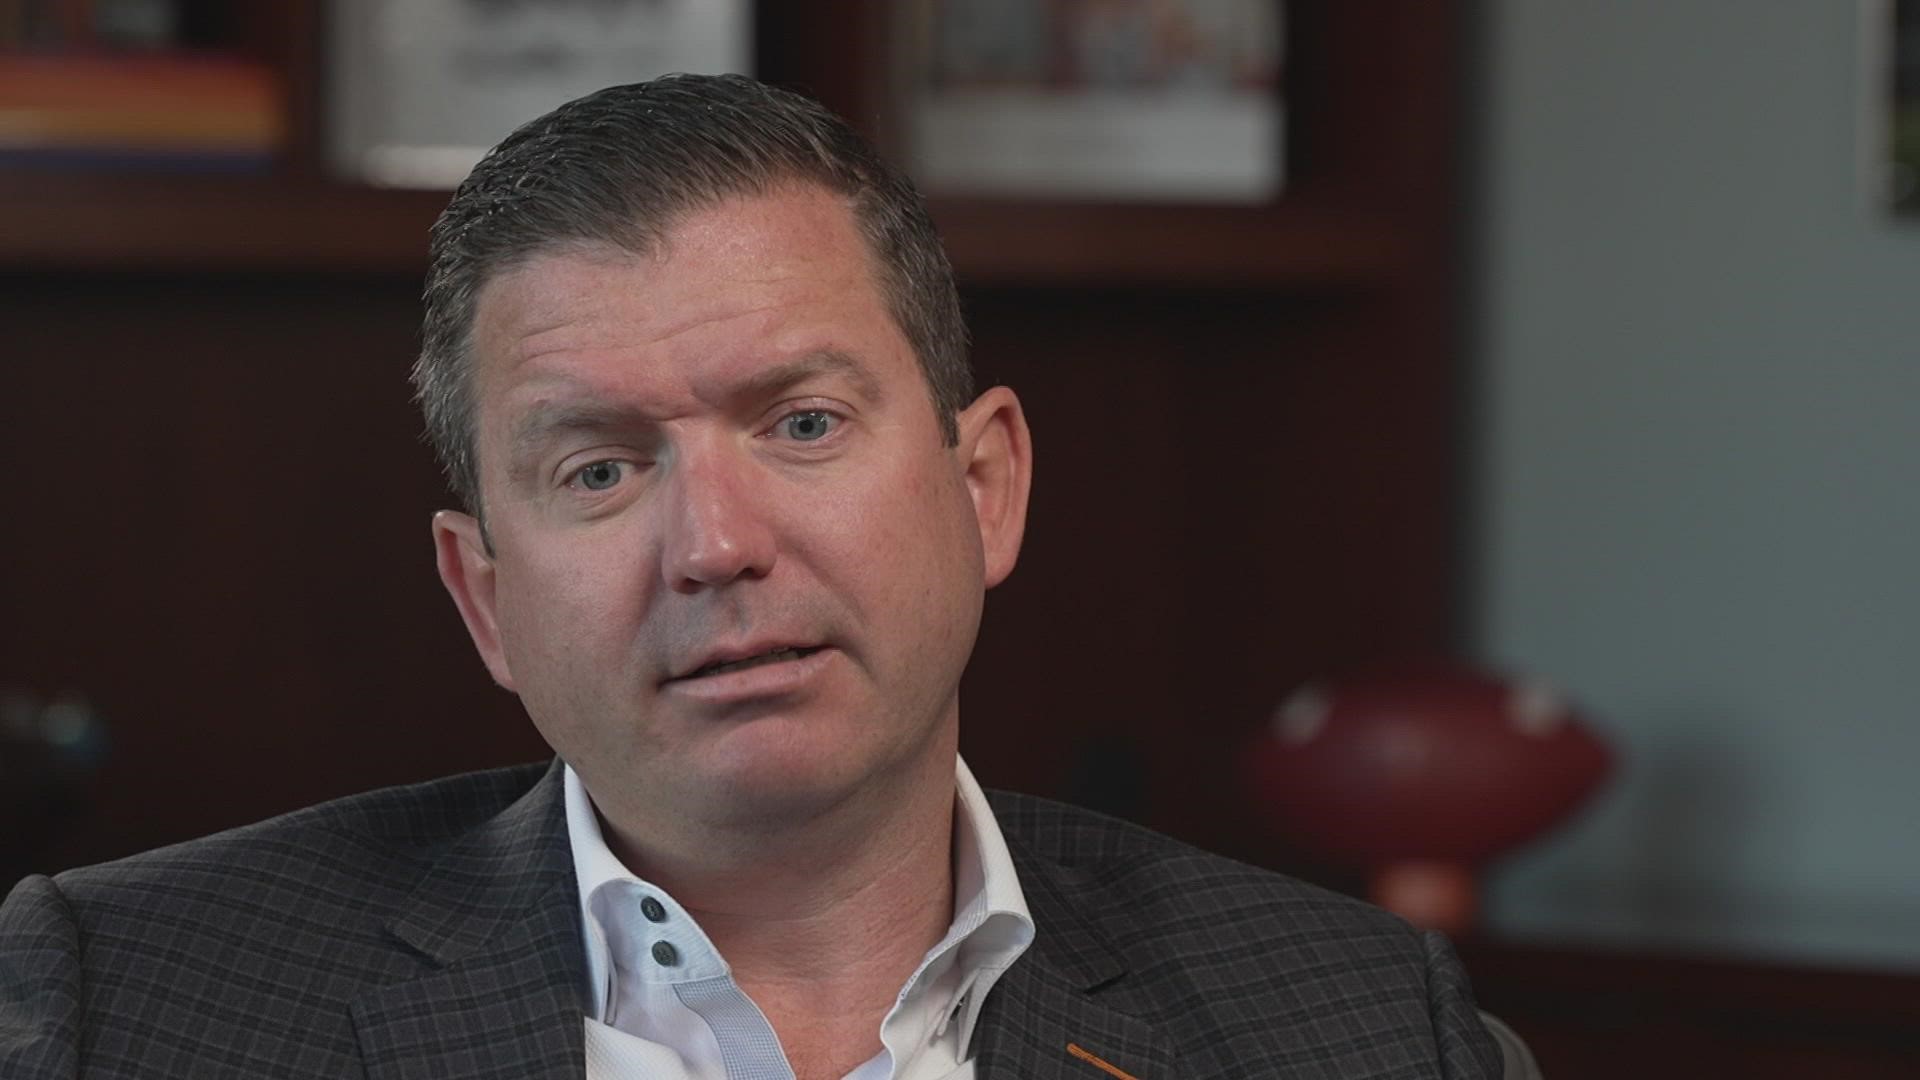 Danny White sat down with WBIR and talked fans, NIL deals, ticket prices, and what he thought when the goalposts came crashing down.